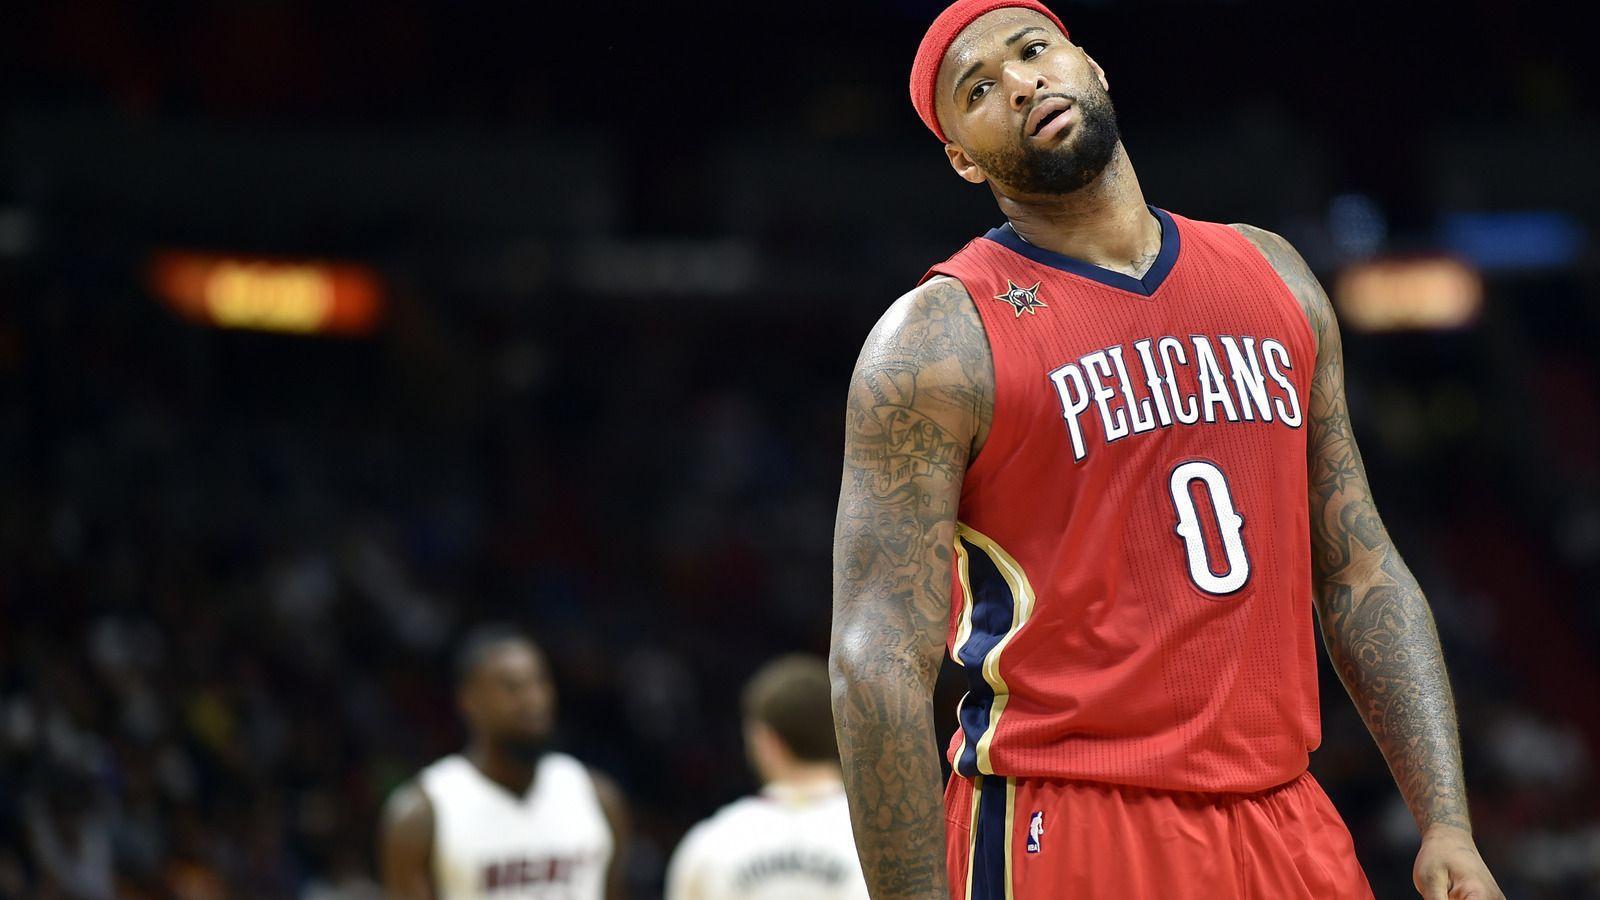 Pelicans C DeMarcus Cousins out with a knee injury